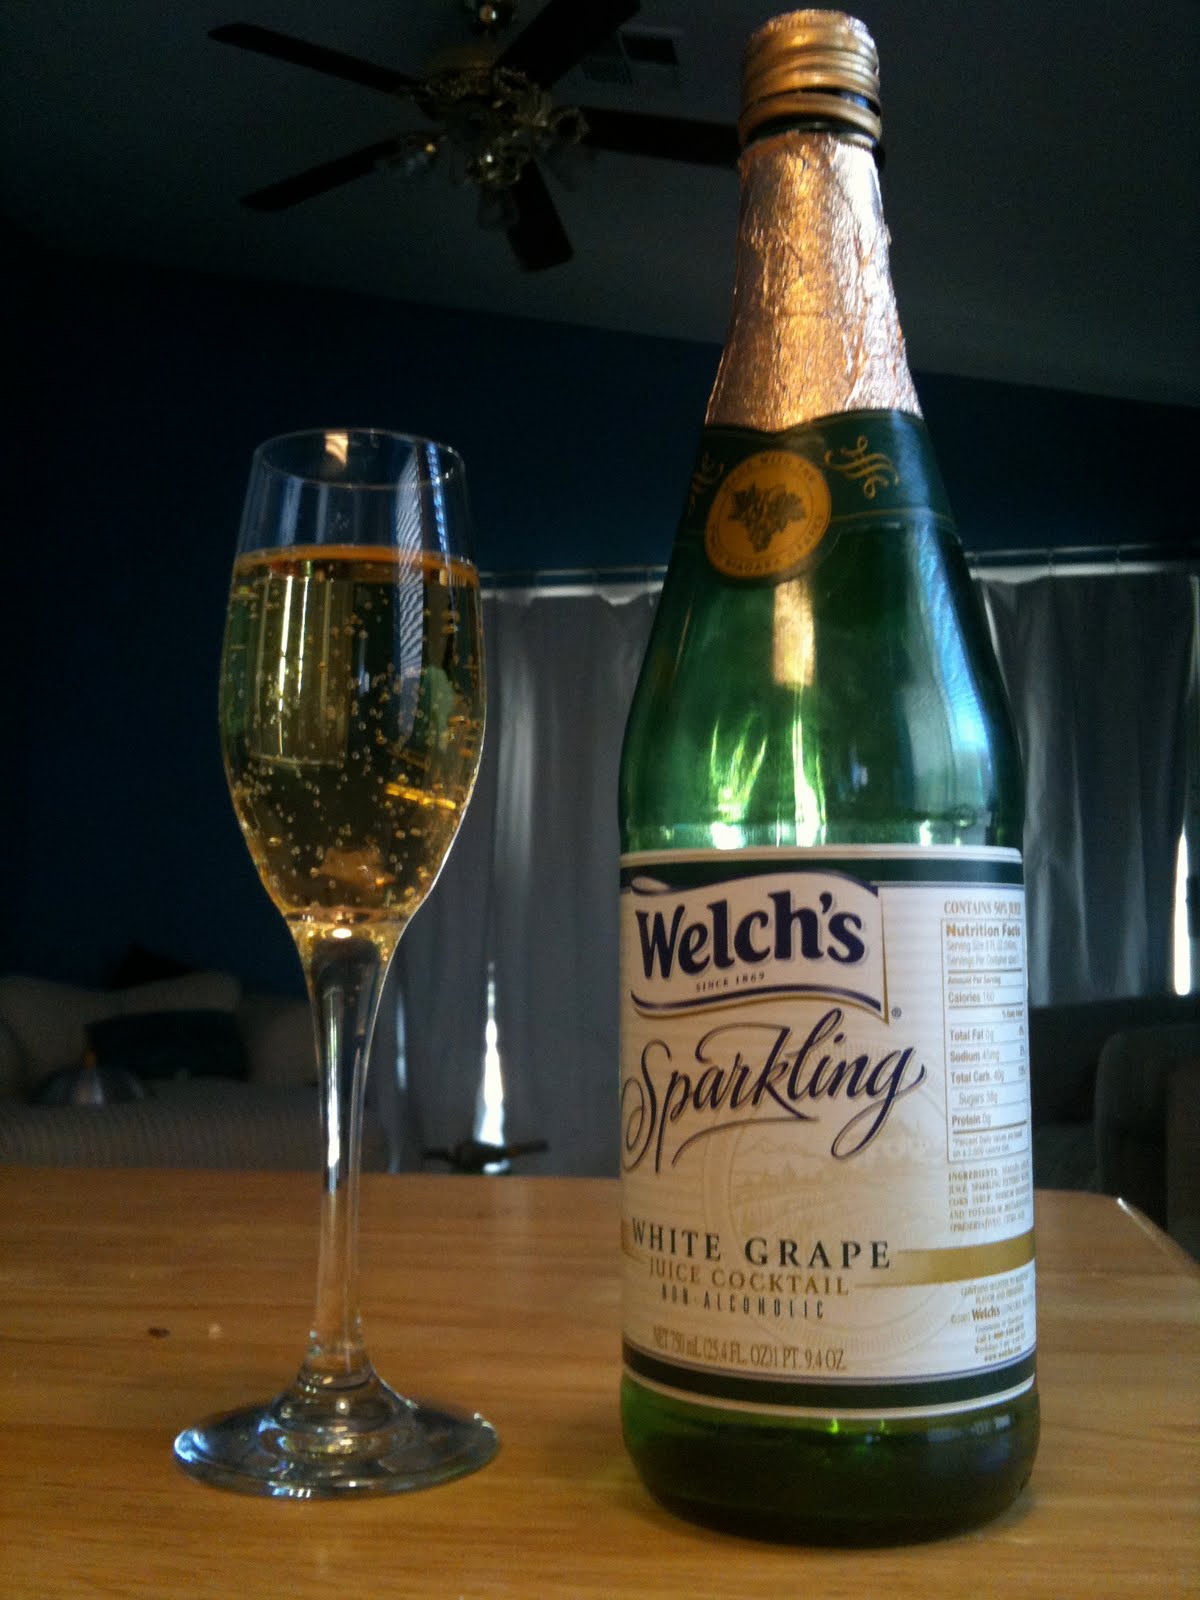 Juice of the Vine: Welch's Sparkling White Grape Juice